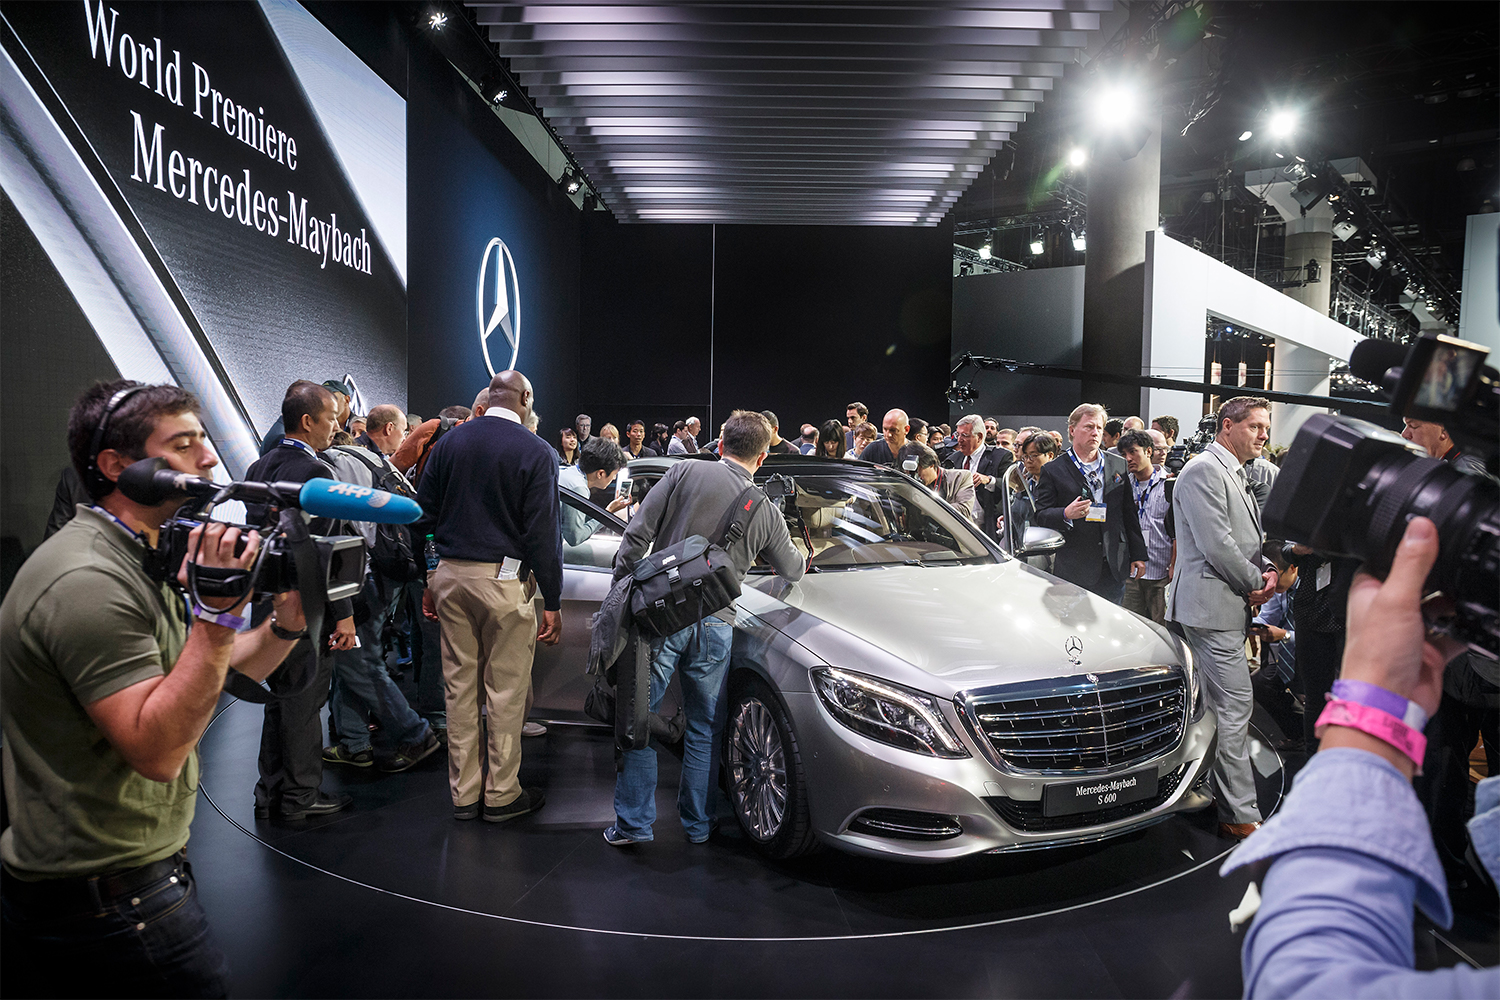 Press swarm the Mercedes-Maybach S 600 at the Los Angeles Auto Show in 2014